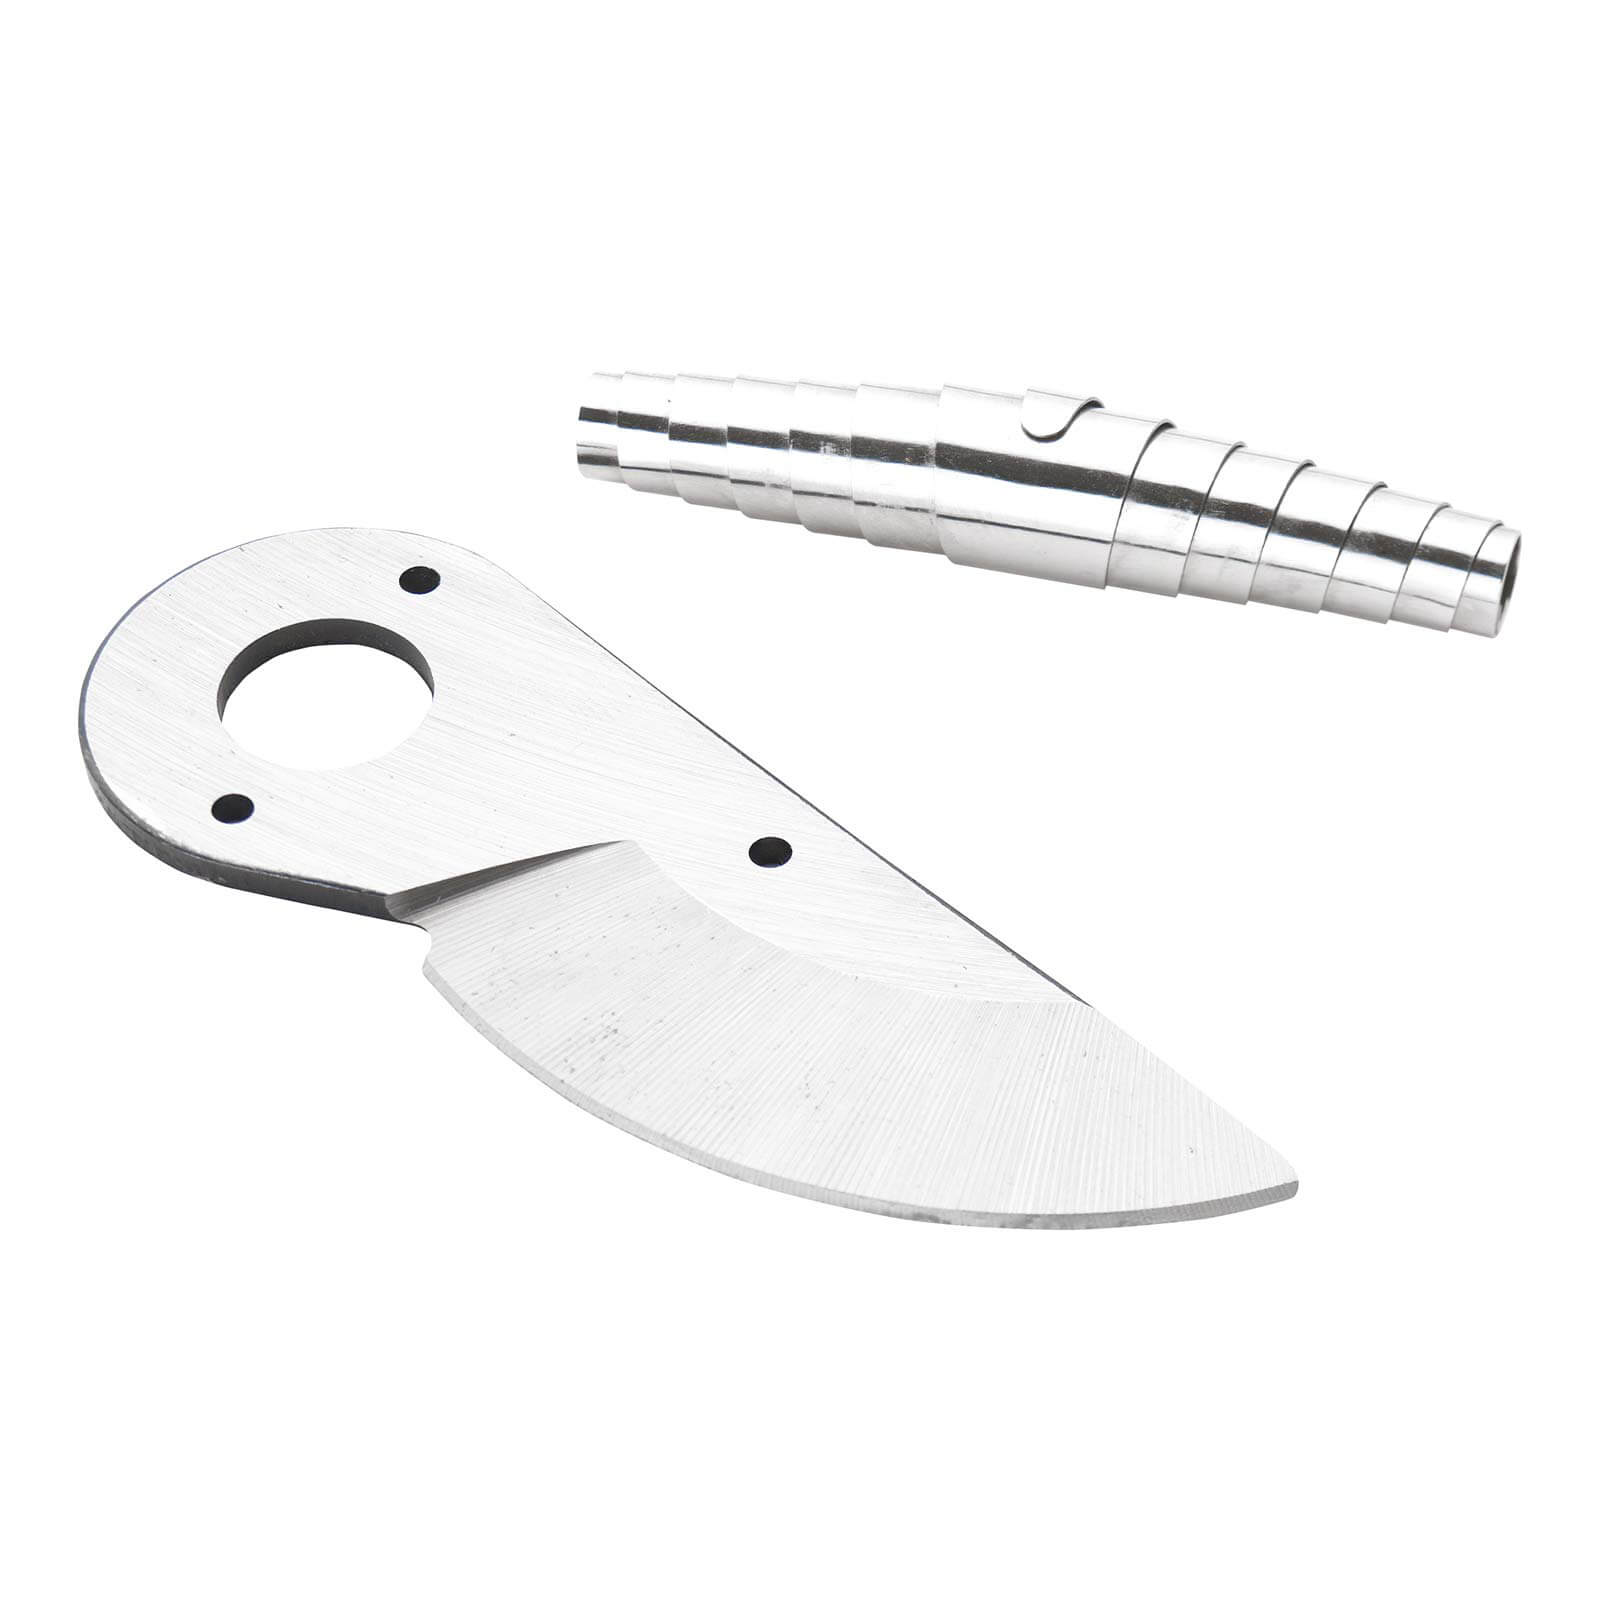 Photo of Kew Gardens Spare Blade And Spring For 6659kew Secateurs